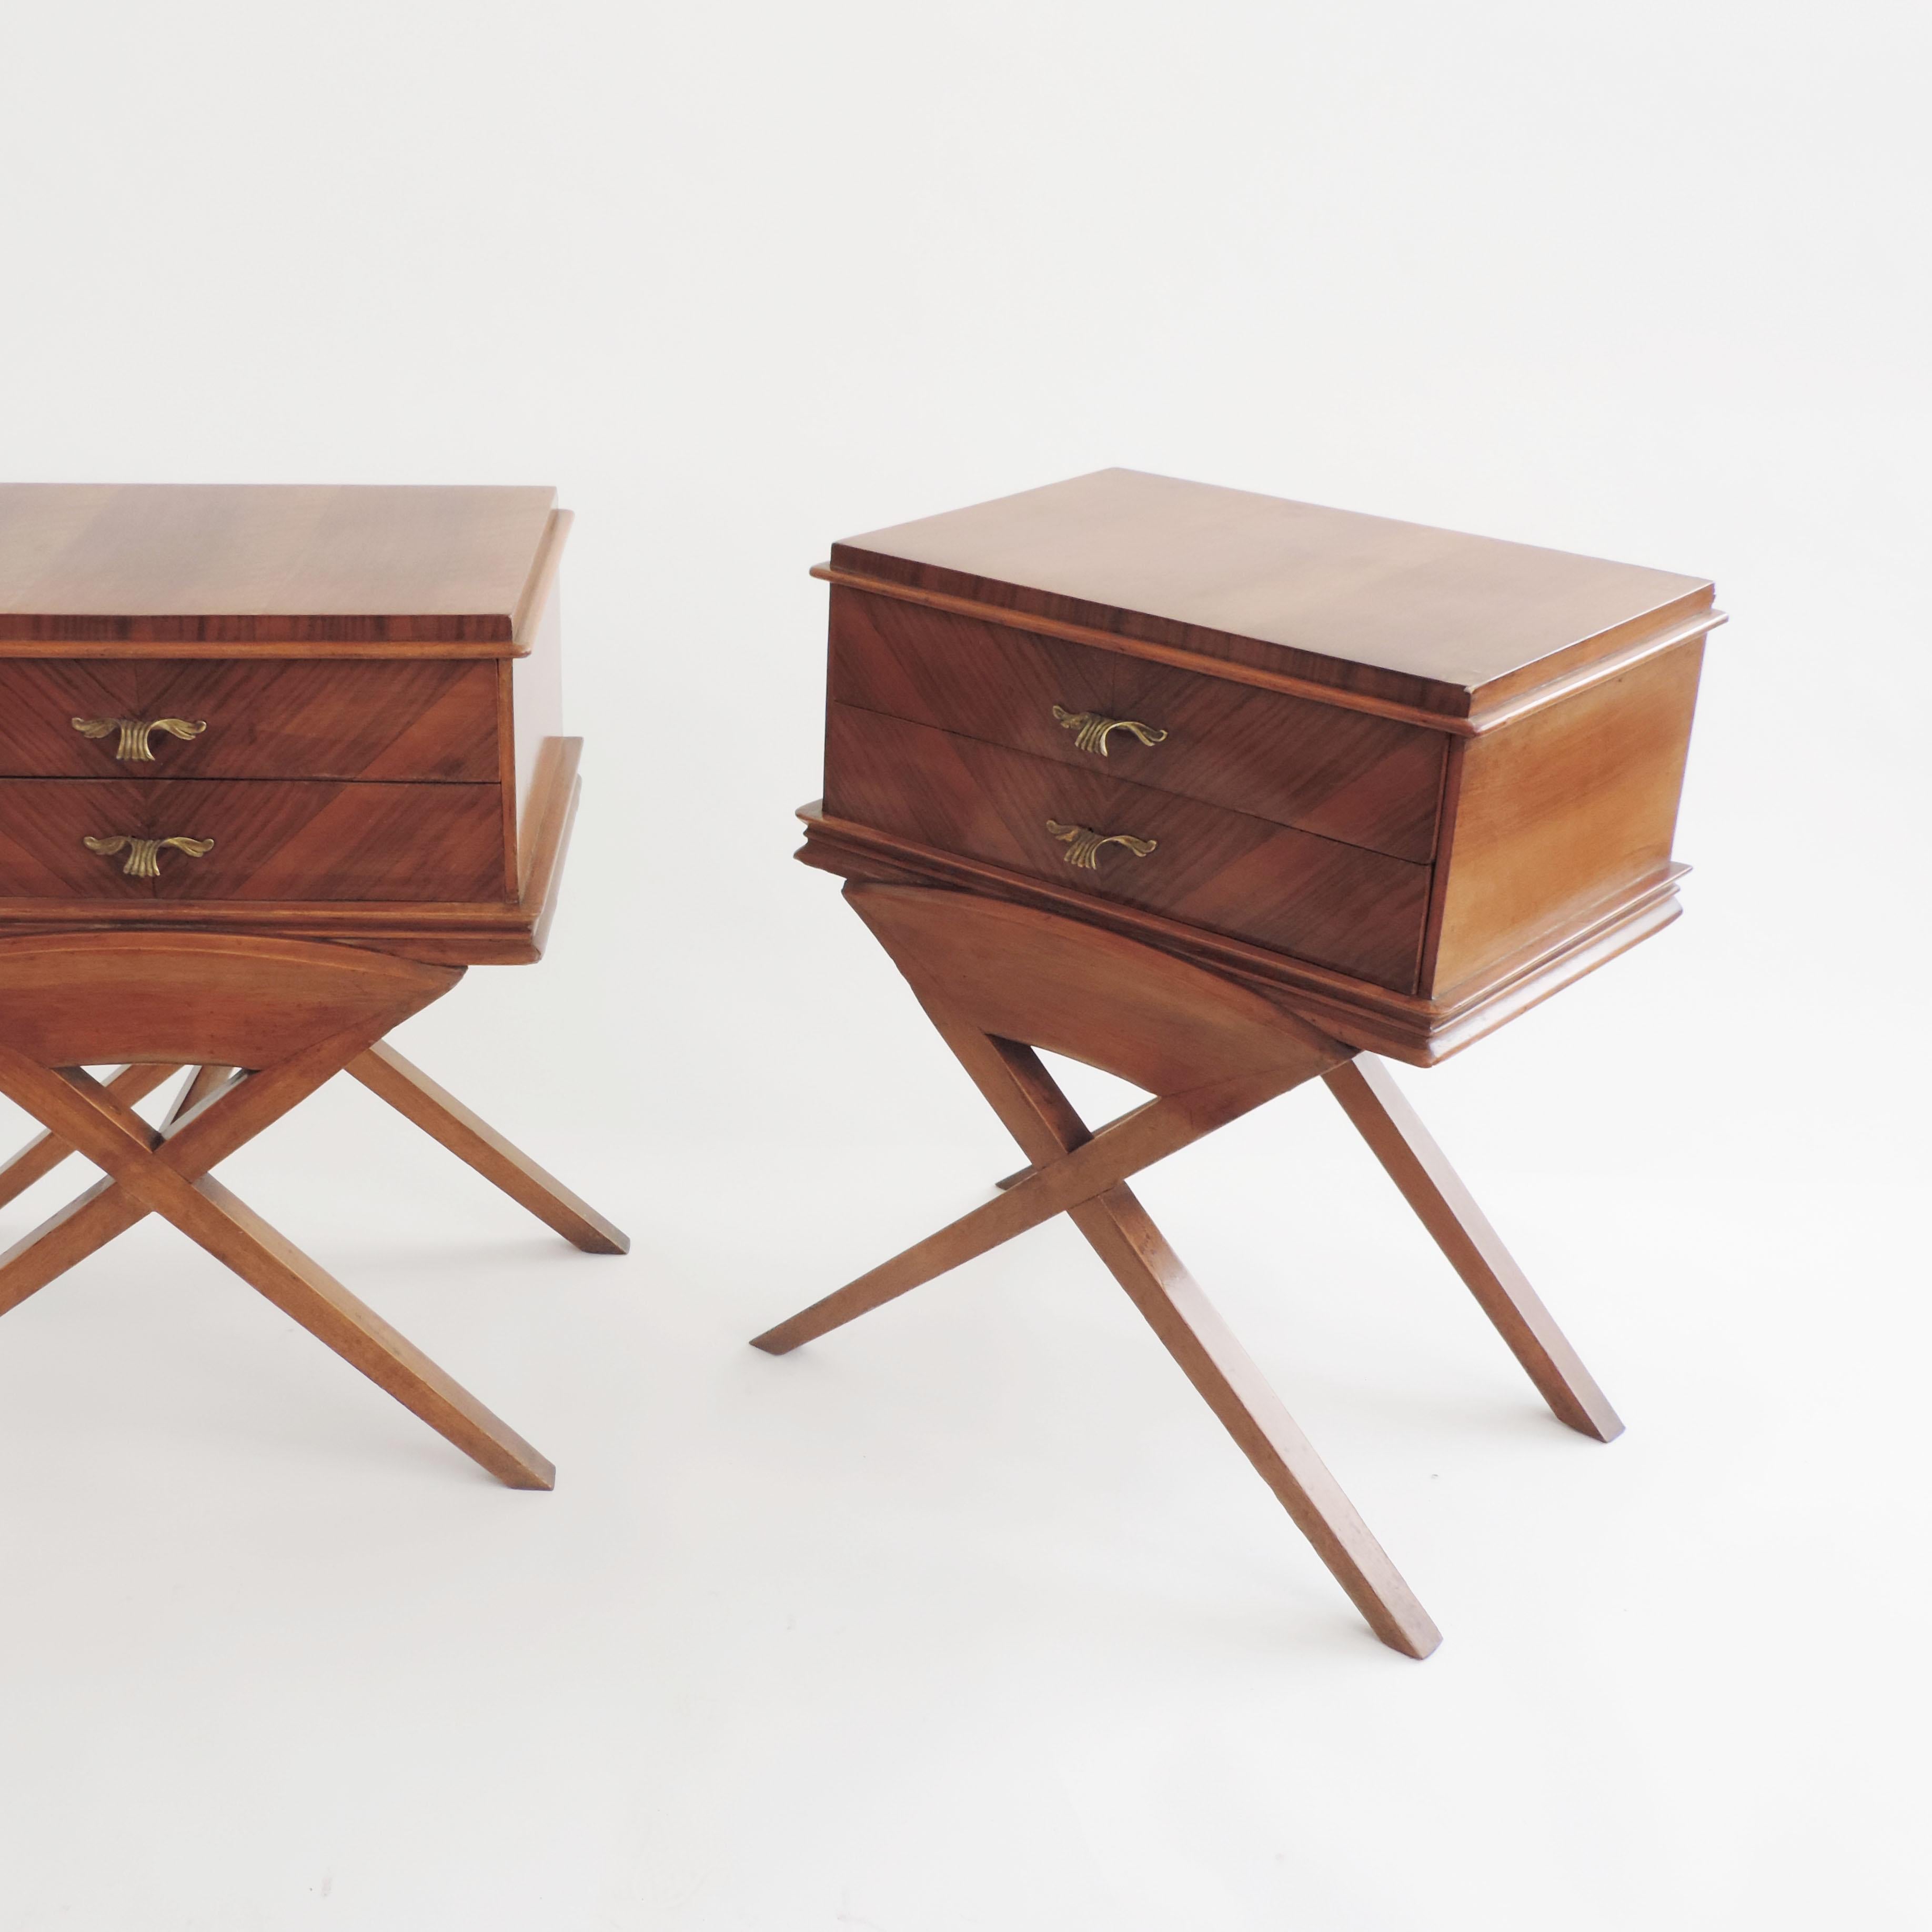 Pair of Italian 1940s Wood Bed Side Tables with Two Drawers.
Very Unusual Italian design, X legs.